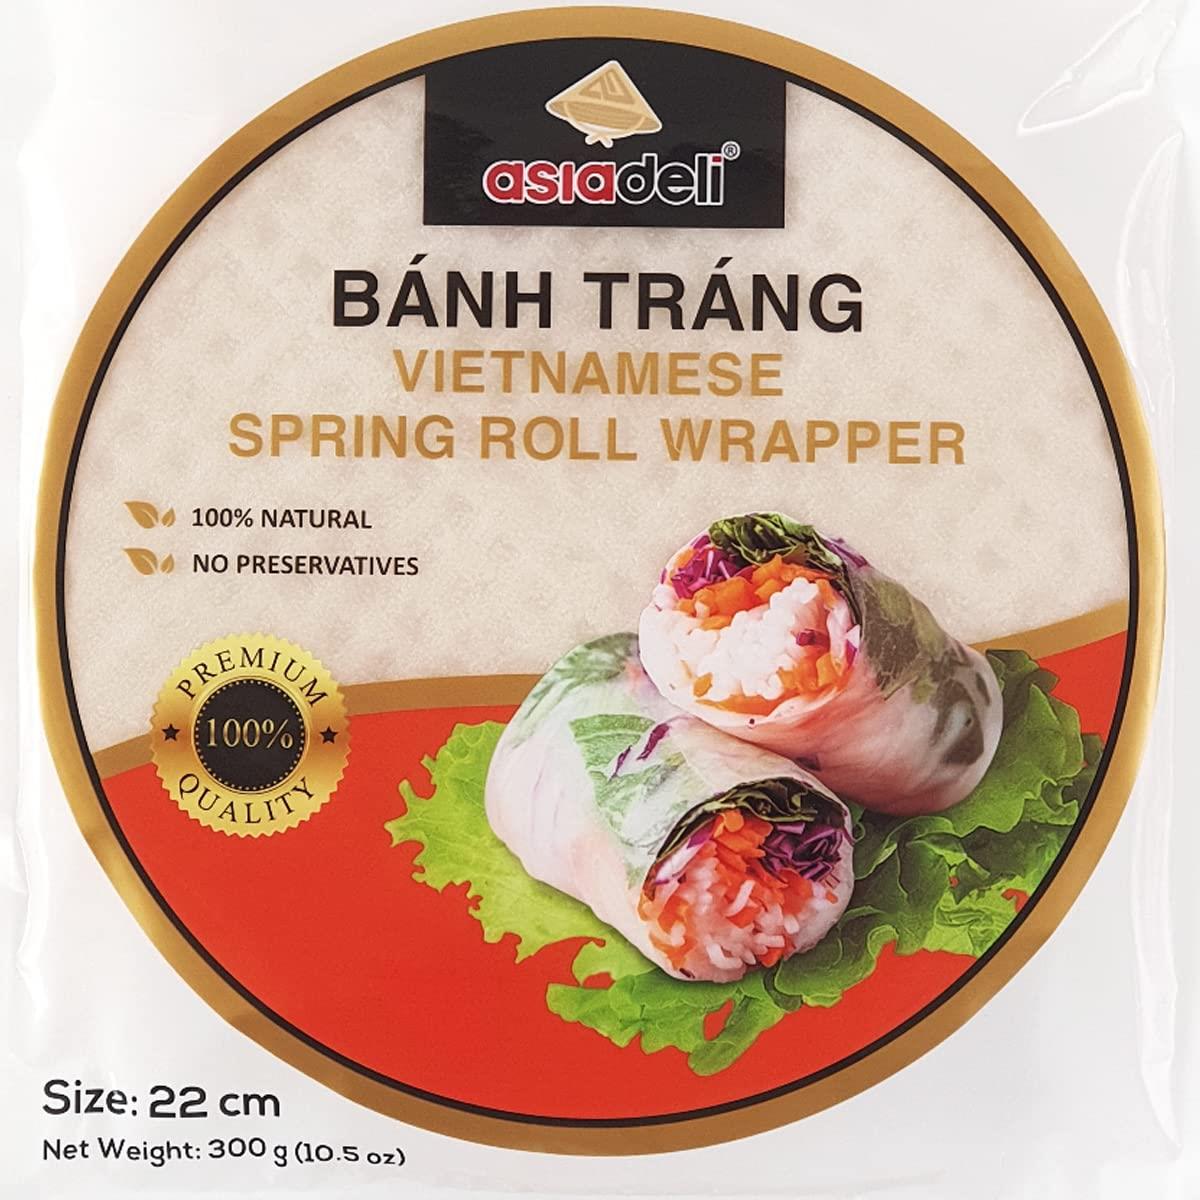 30 Sheets Premium Rice Papers, 30~32 Sheets Per Pack, 10.5 oz, Vietnamese Spring Roll Wrapper, Premium Rice Paper, Round 22cm by ASIADELI(Pack of 1 Bag)